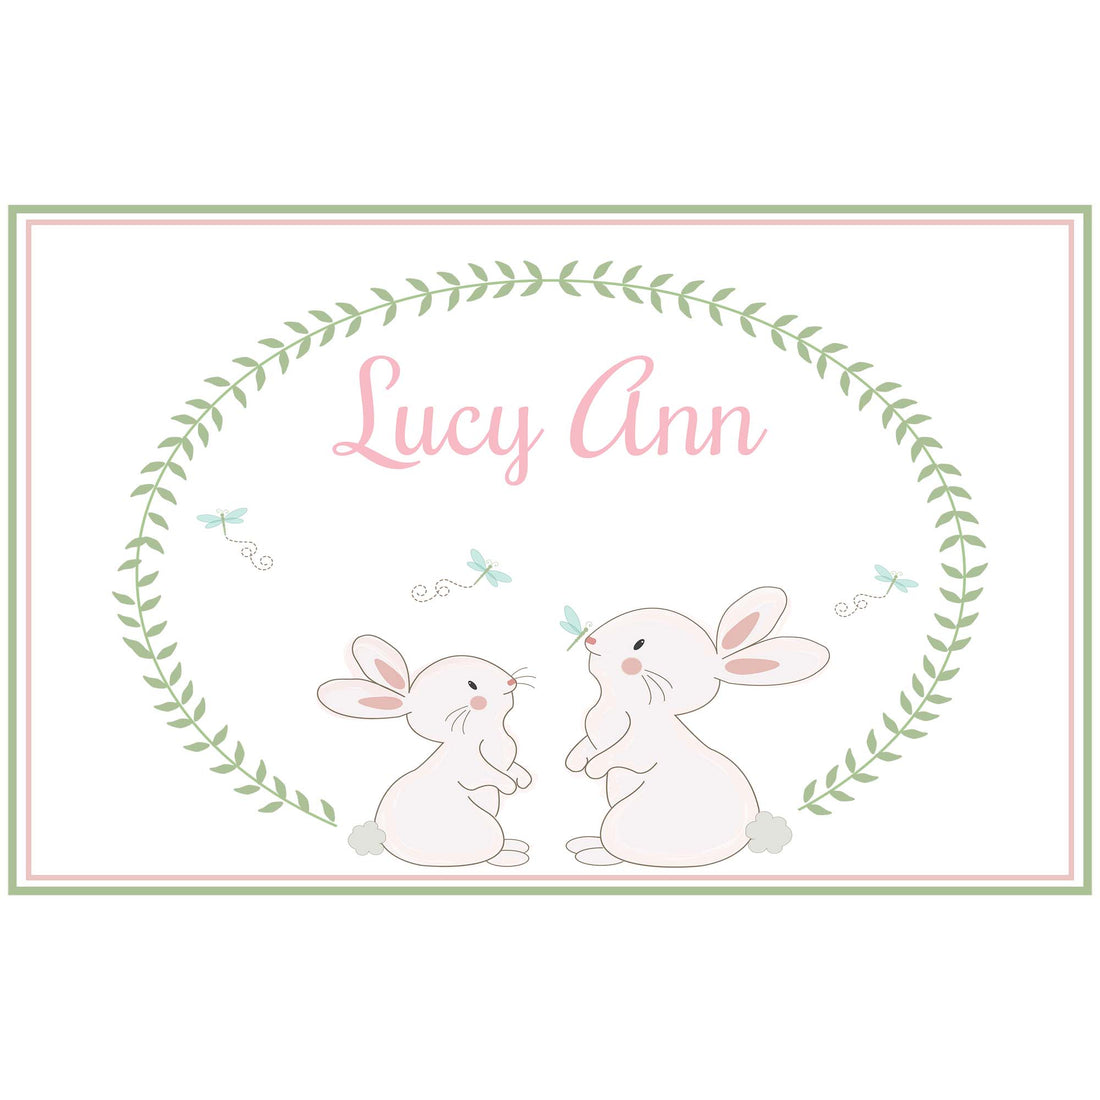 Personalized Placemat with Classic Bunny design